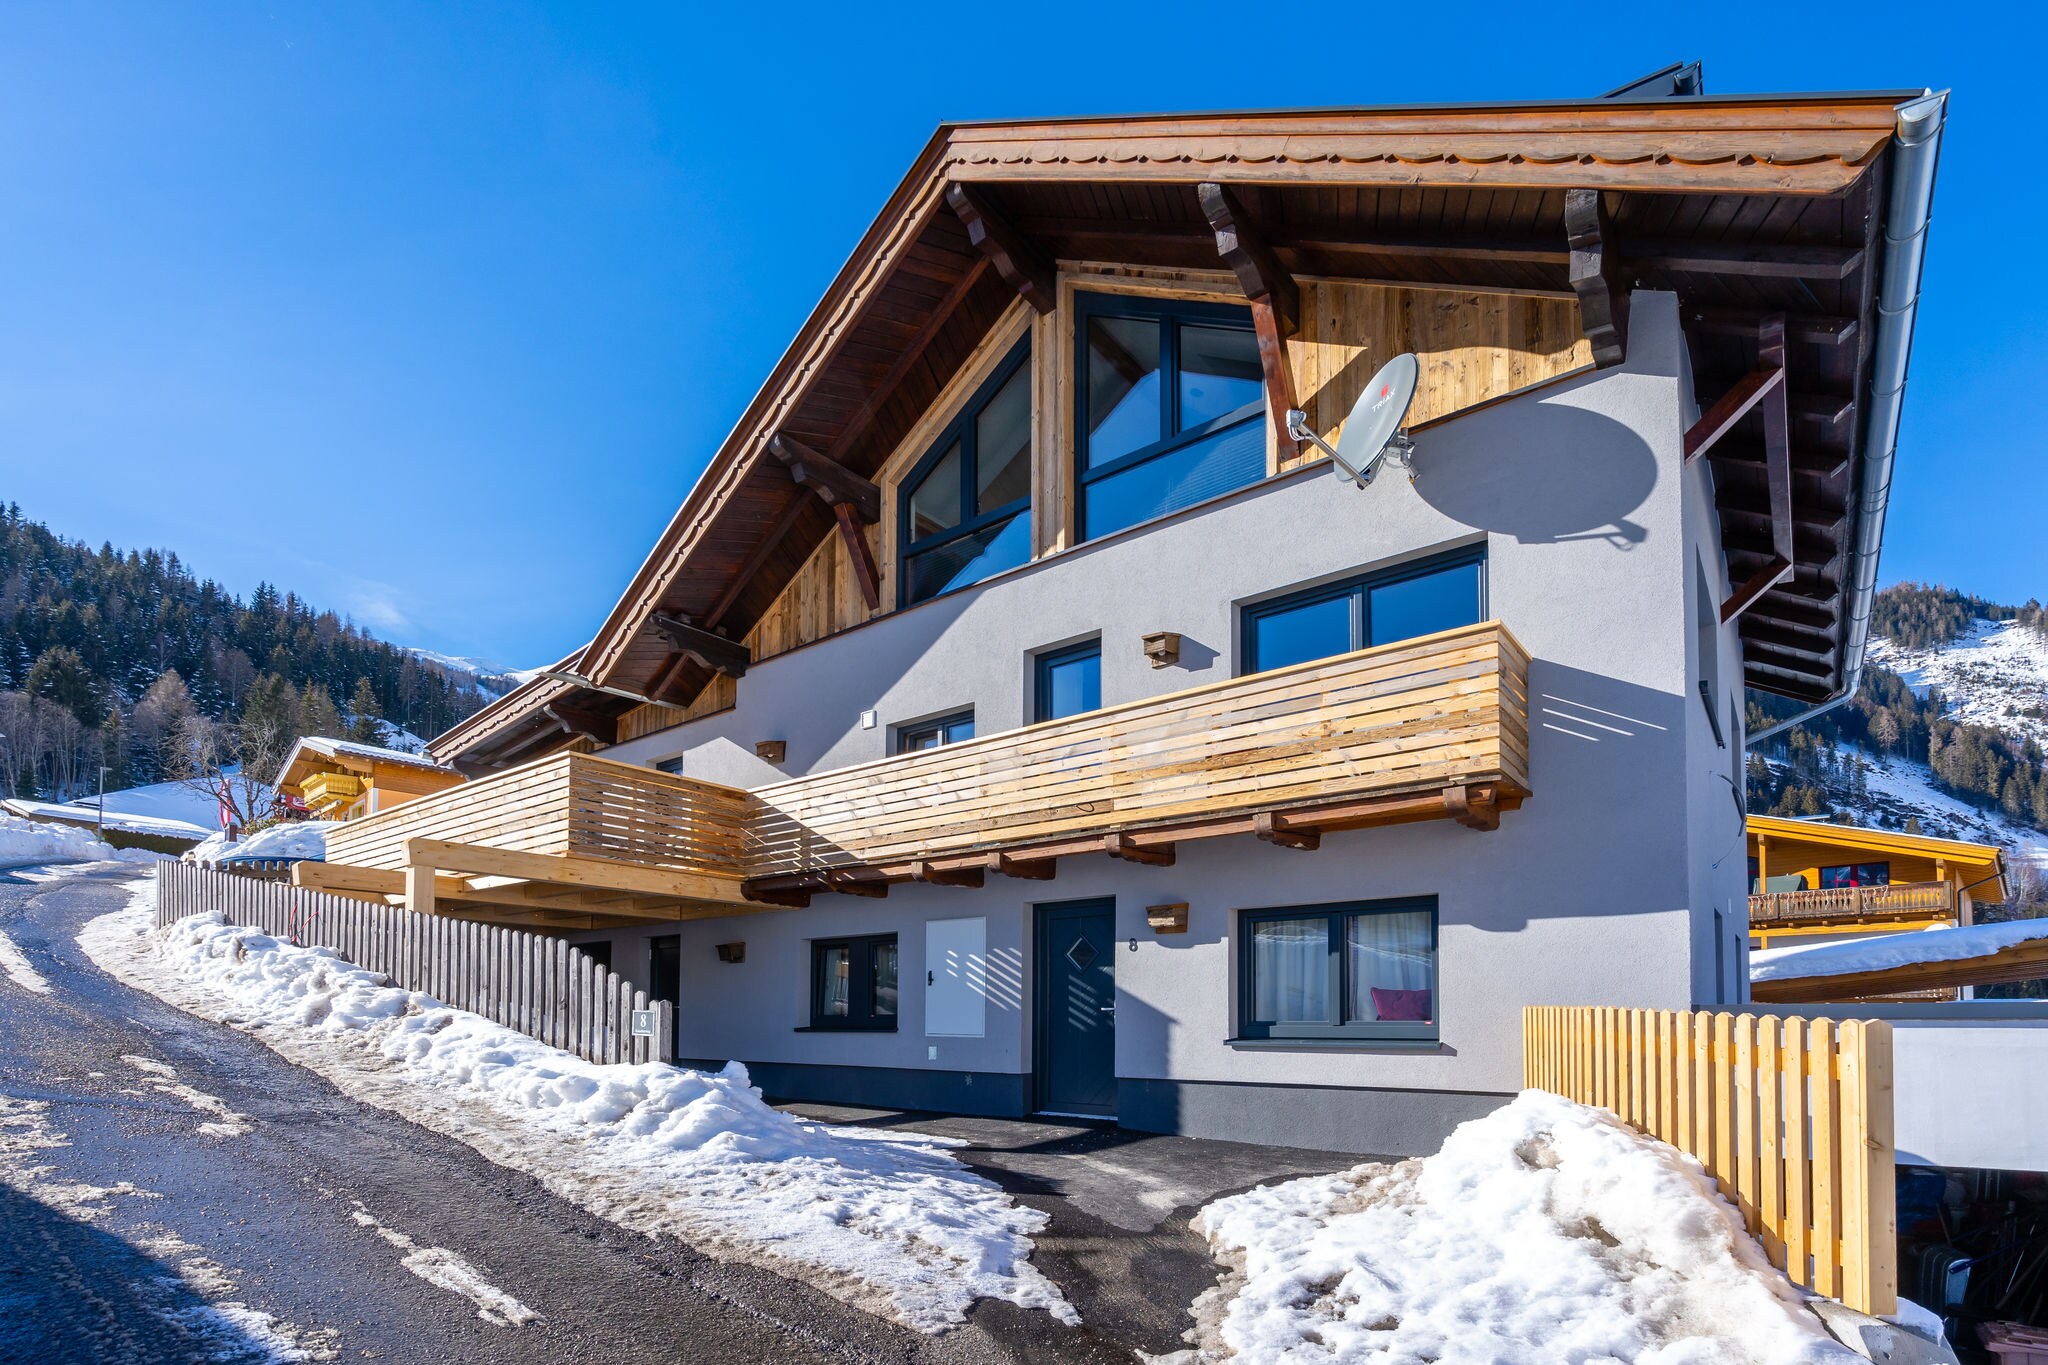 Attractive holiday home in Rauris, near the ski piste